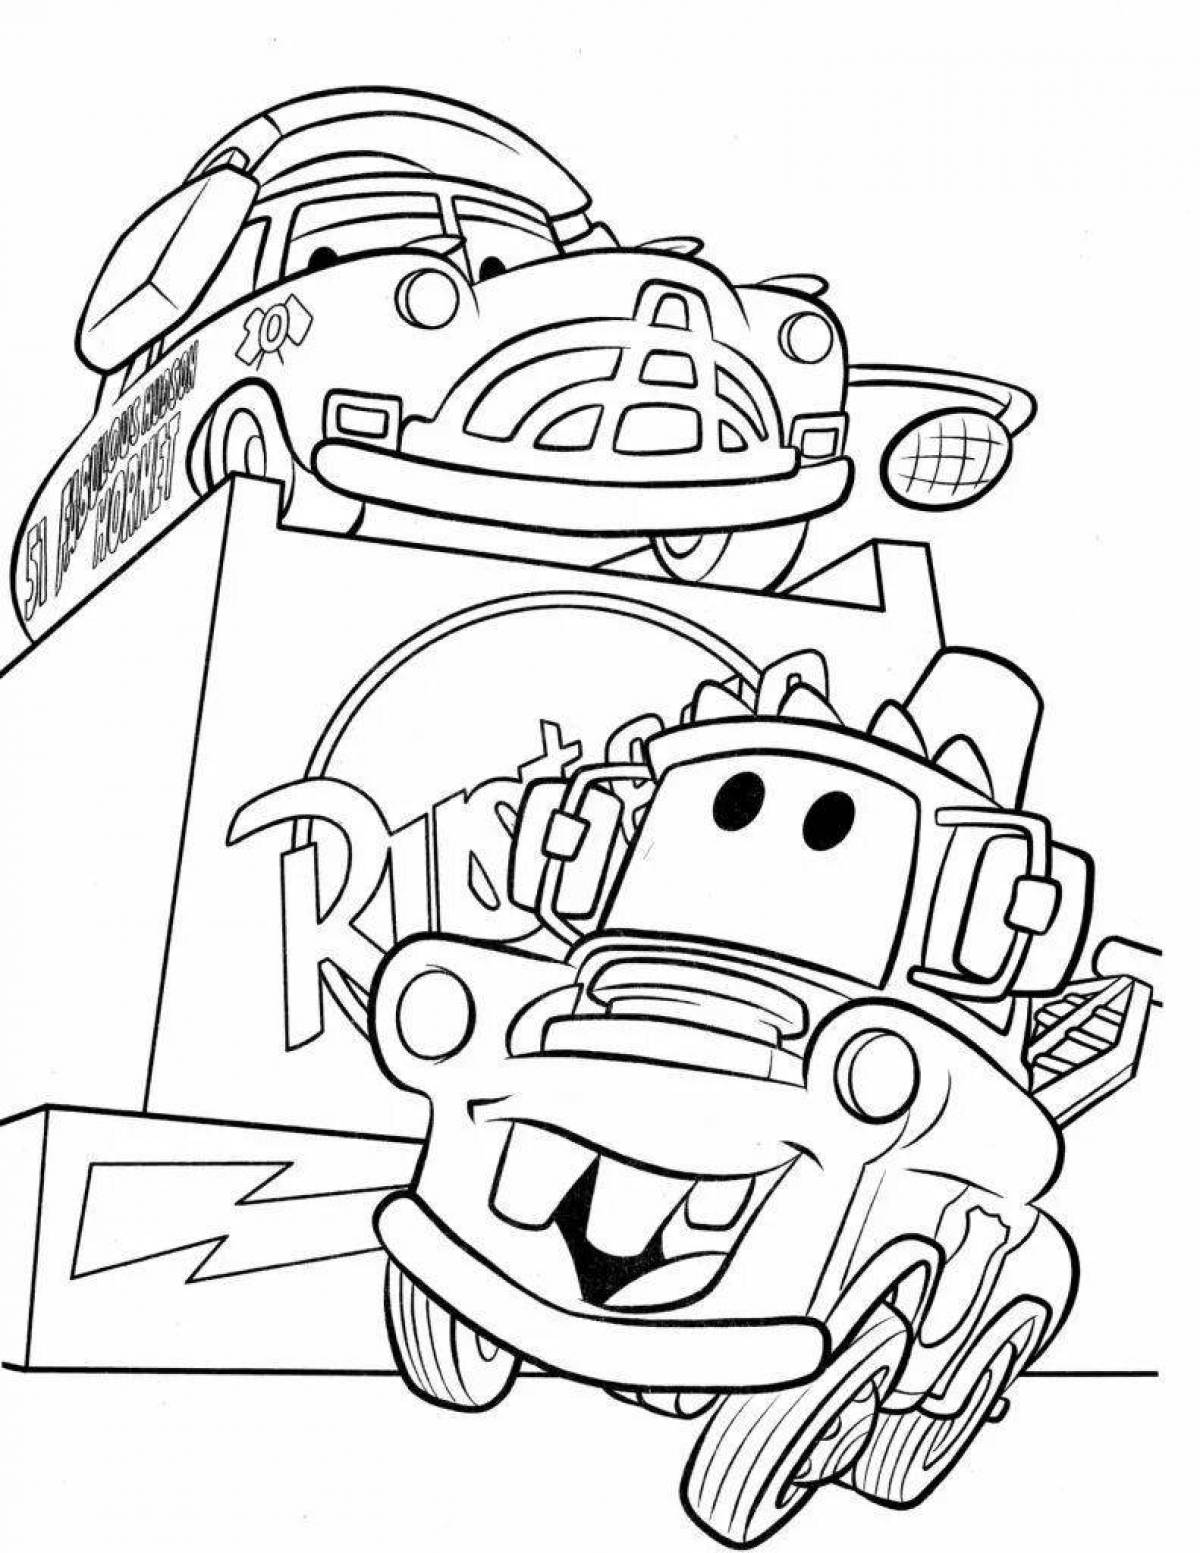 Coloring page adorable sally cars